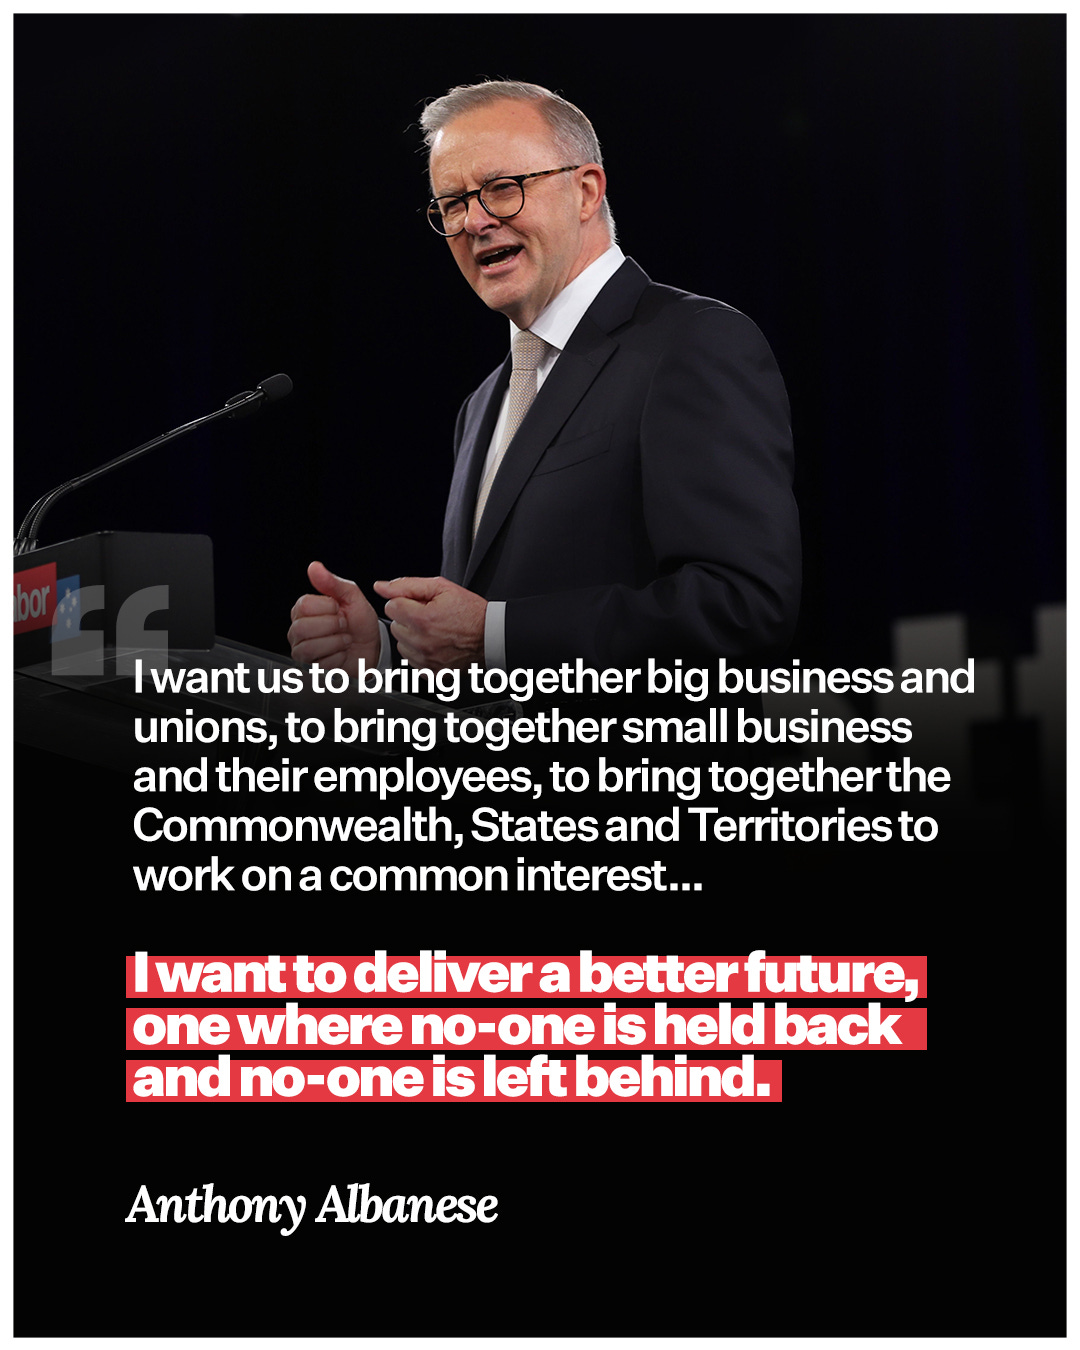 May be an image of text that says "|want us to bring together big business and unions, to bring together small business and their employees, to bring together the Commonwealth, States and Territories work on a common interest... todeliver a better future, one where held and dno-oneisleftbehind. Anthony Albanese"